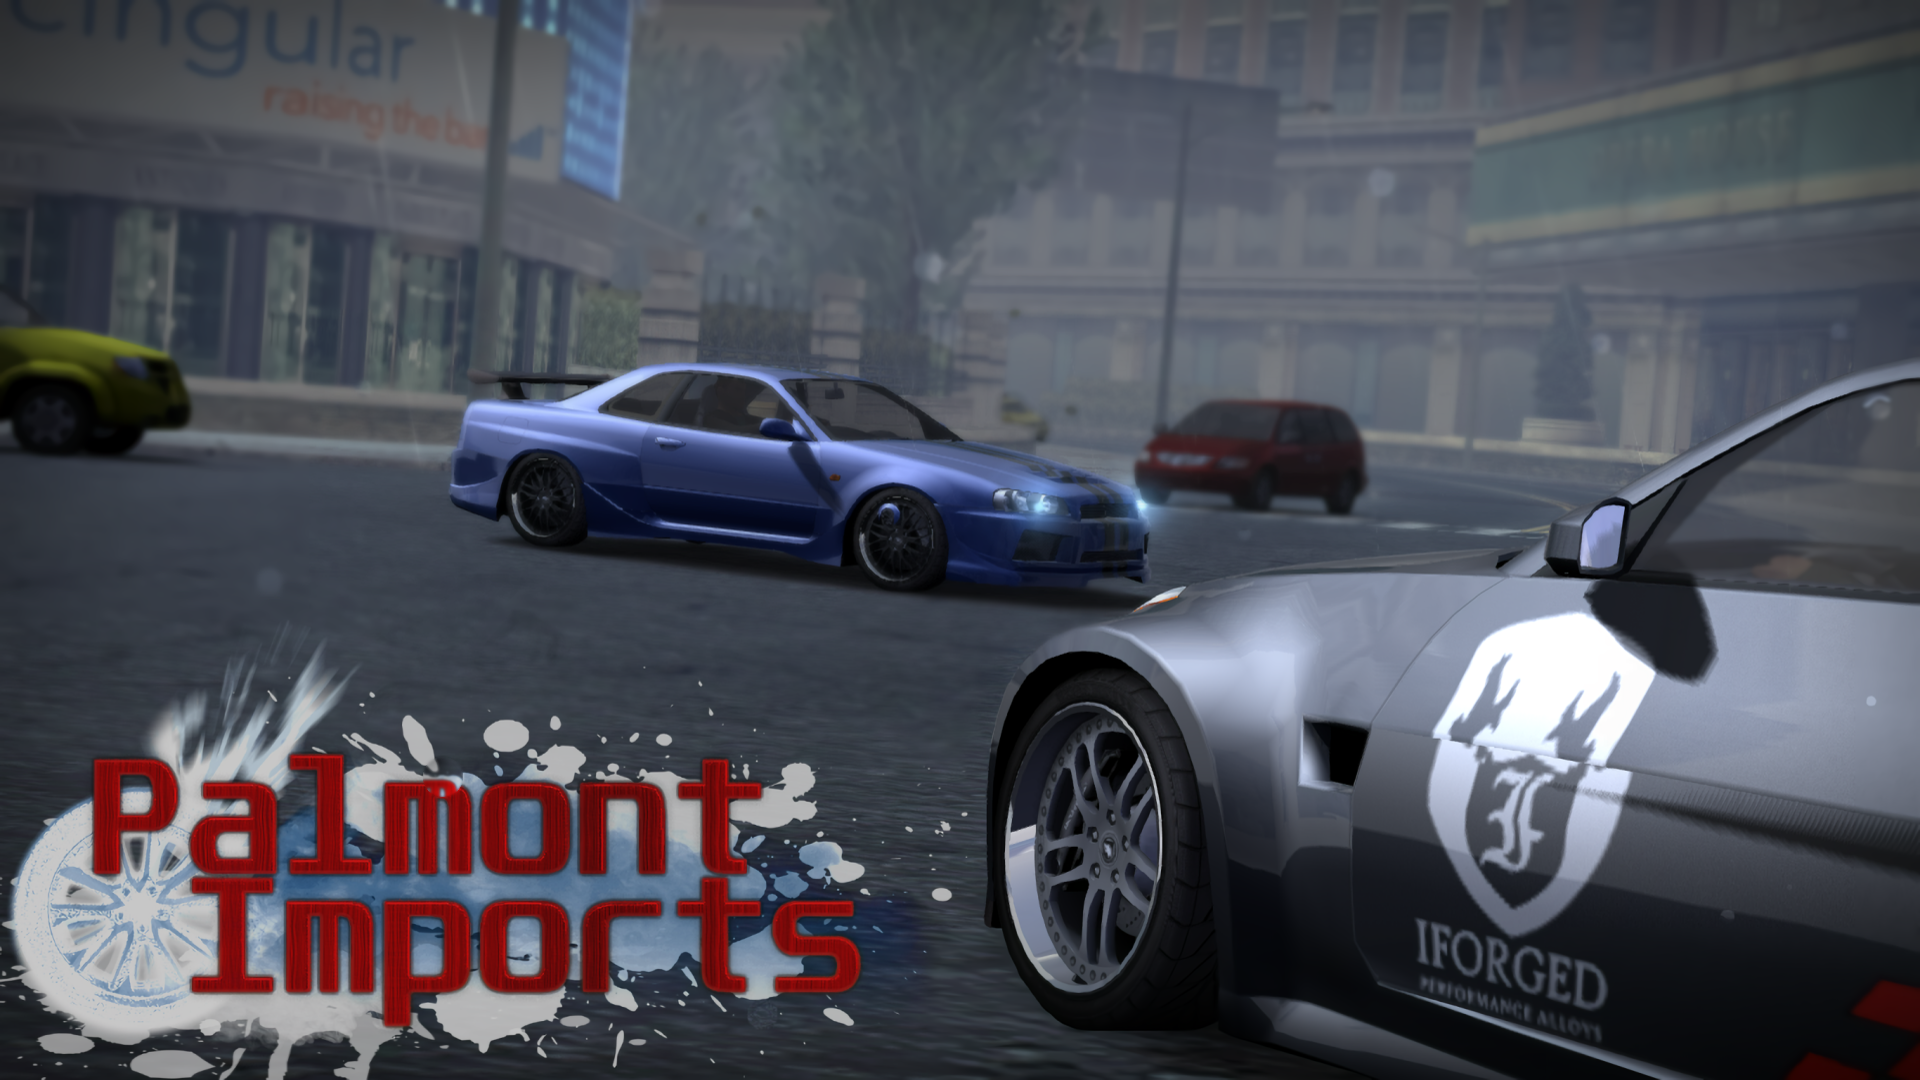 Need For Speed: Most Wanted tem 41 carros